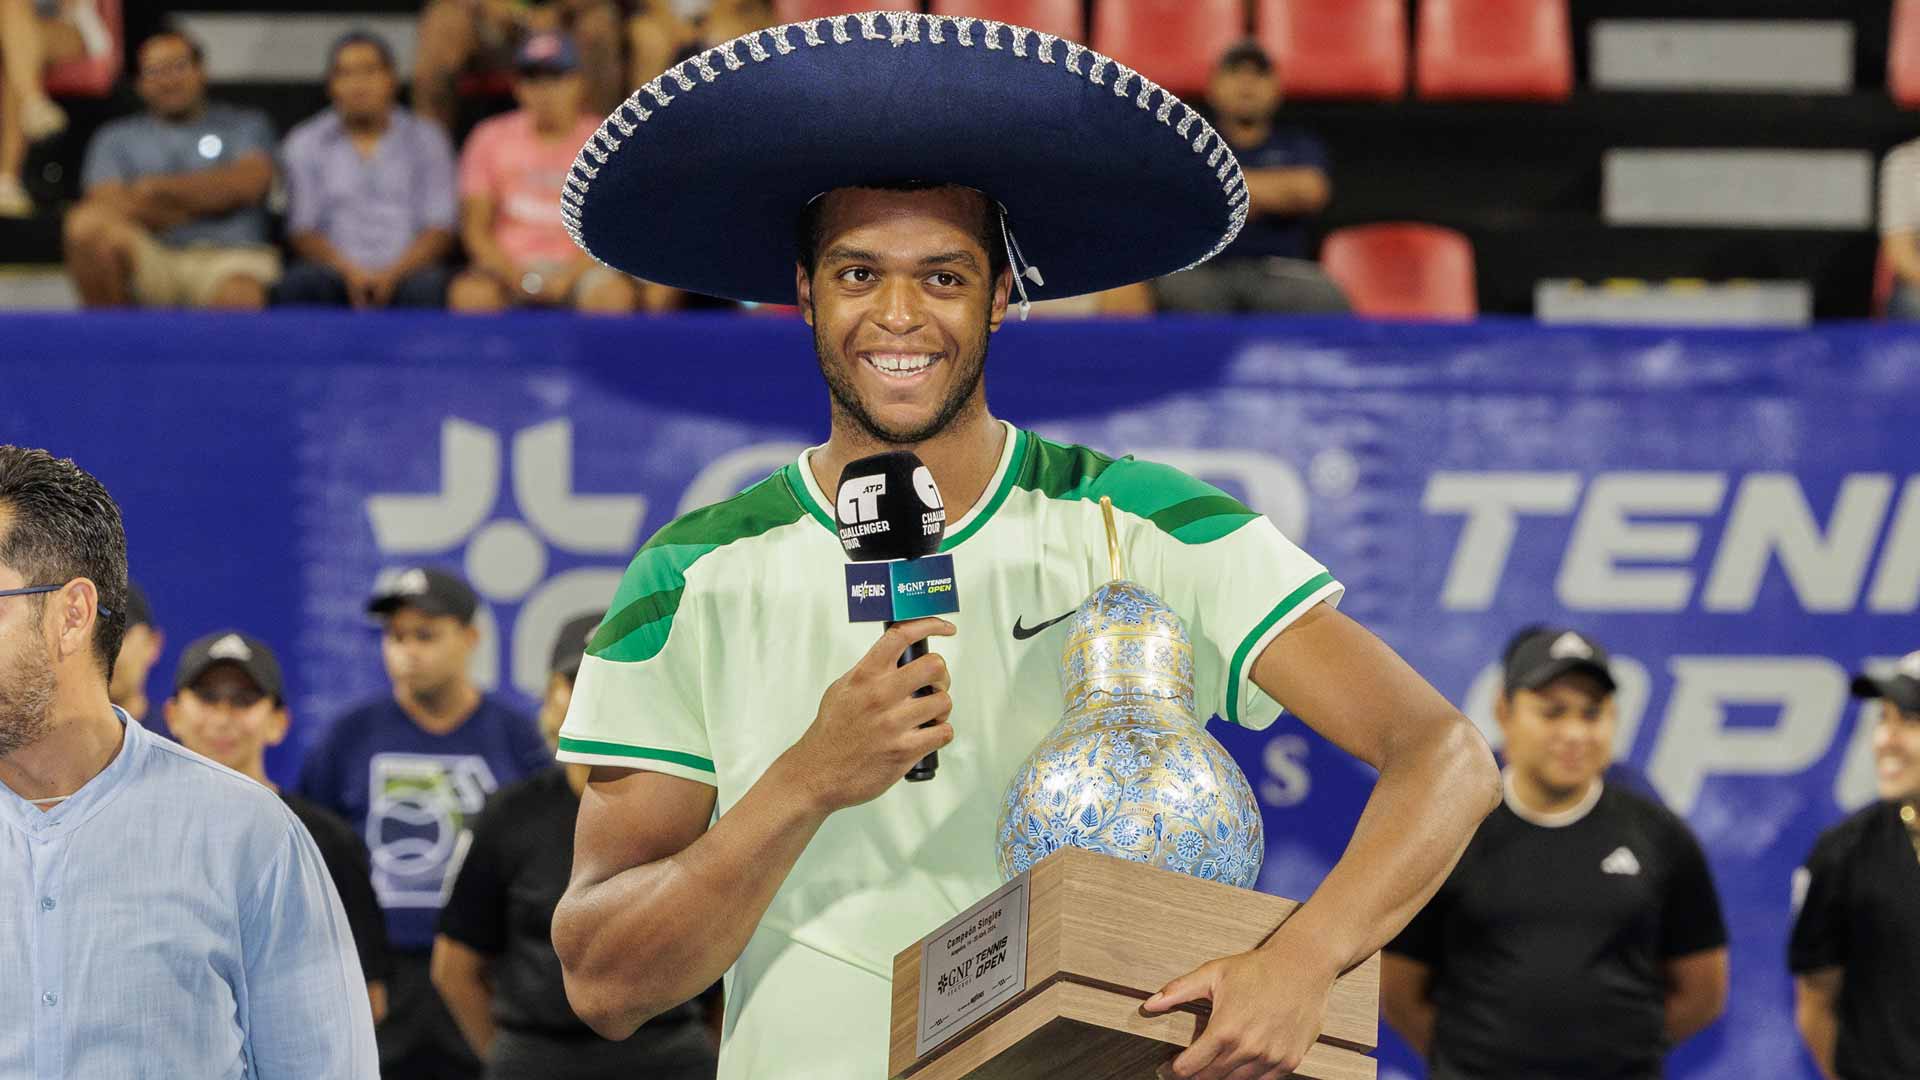 Giovanni Mpetshi Perricard triumphs at the Acapulco Challenger.